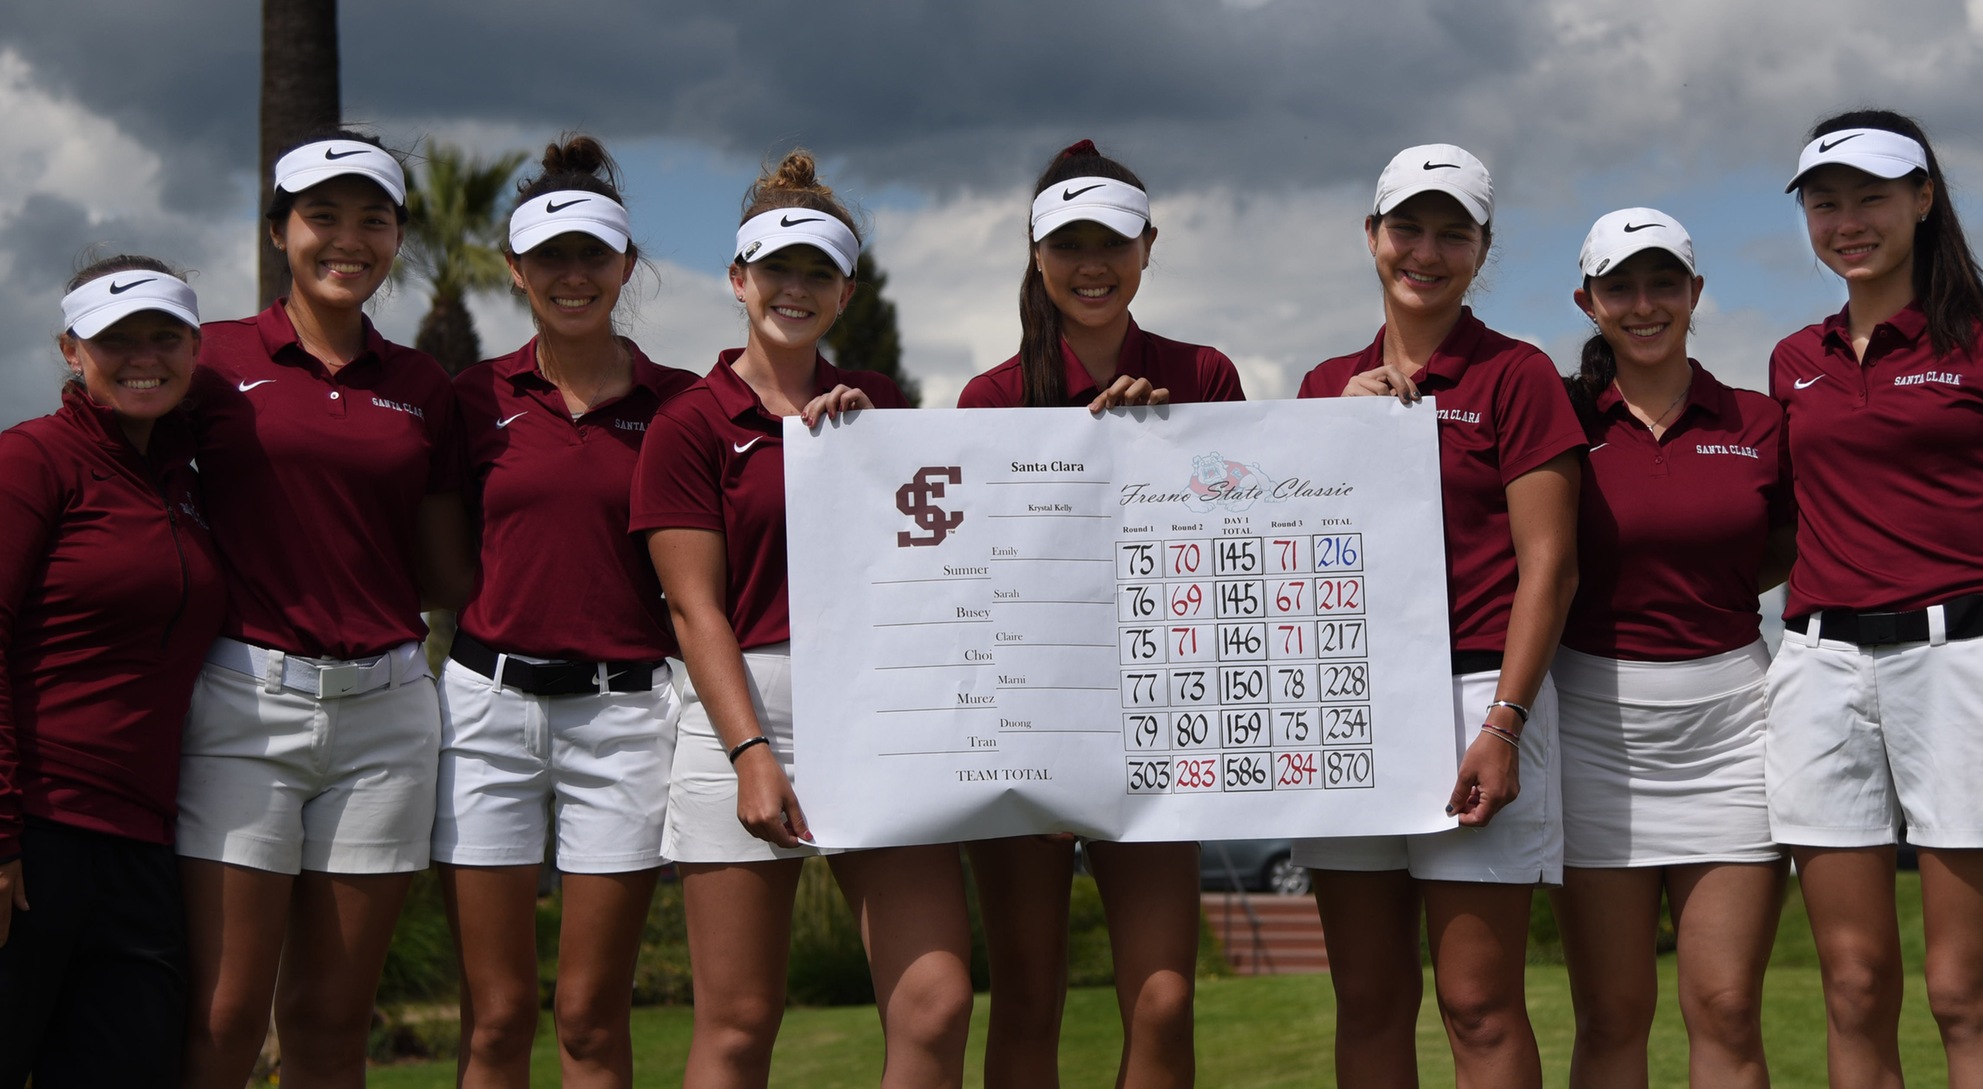 Busey Grabs Podium Finish; Three Women’s Golfers Among Top 10 At Fresno State Classic